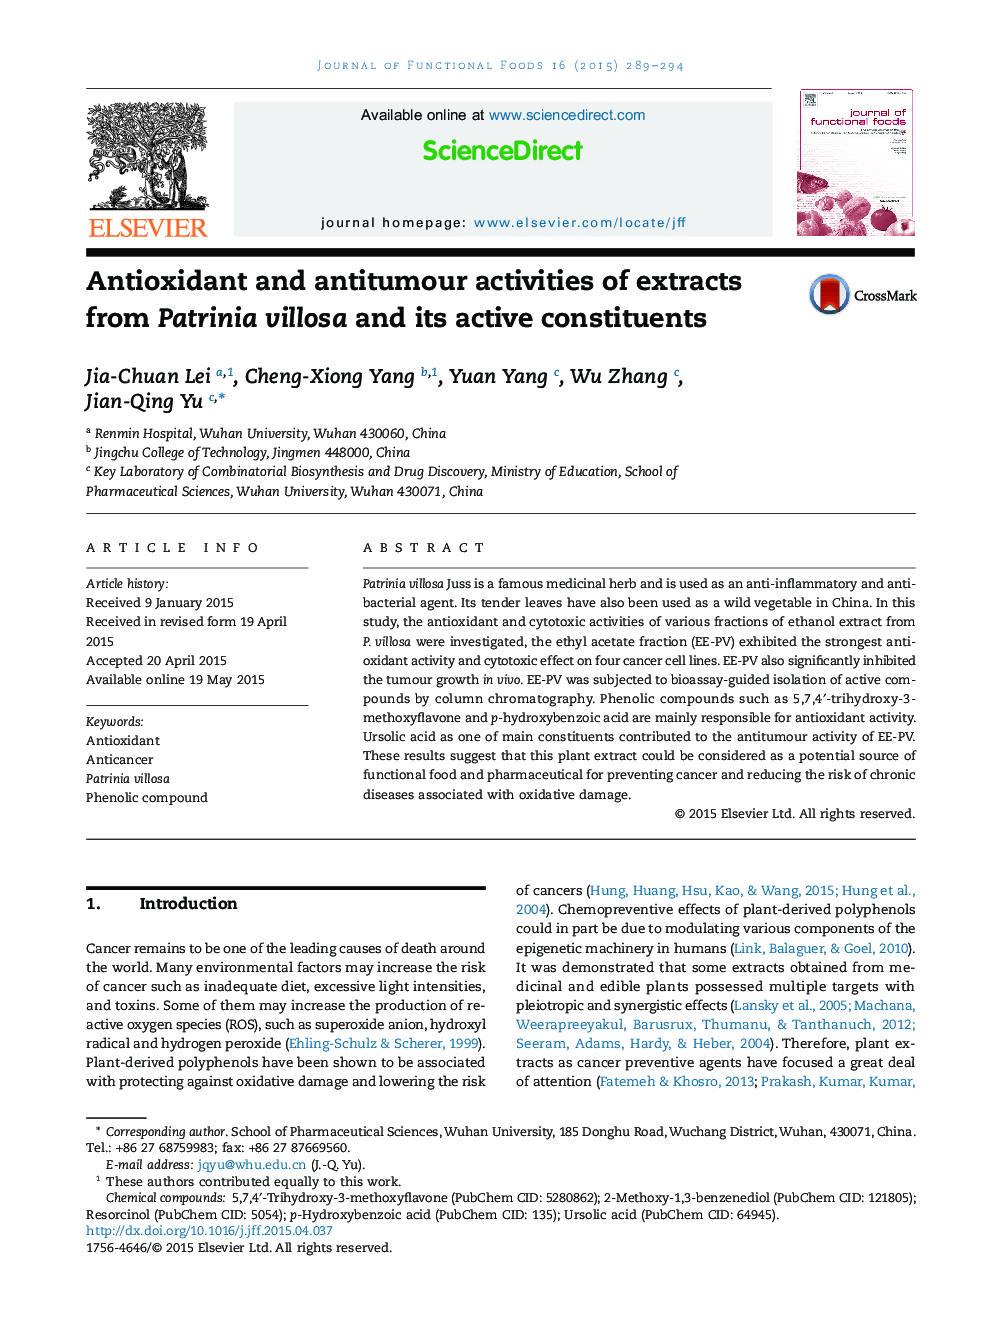 Antioxidant and antitumour activities of extracts from Patrinia villosa and its active constituents